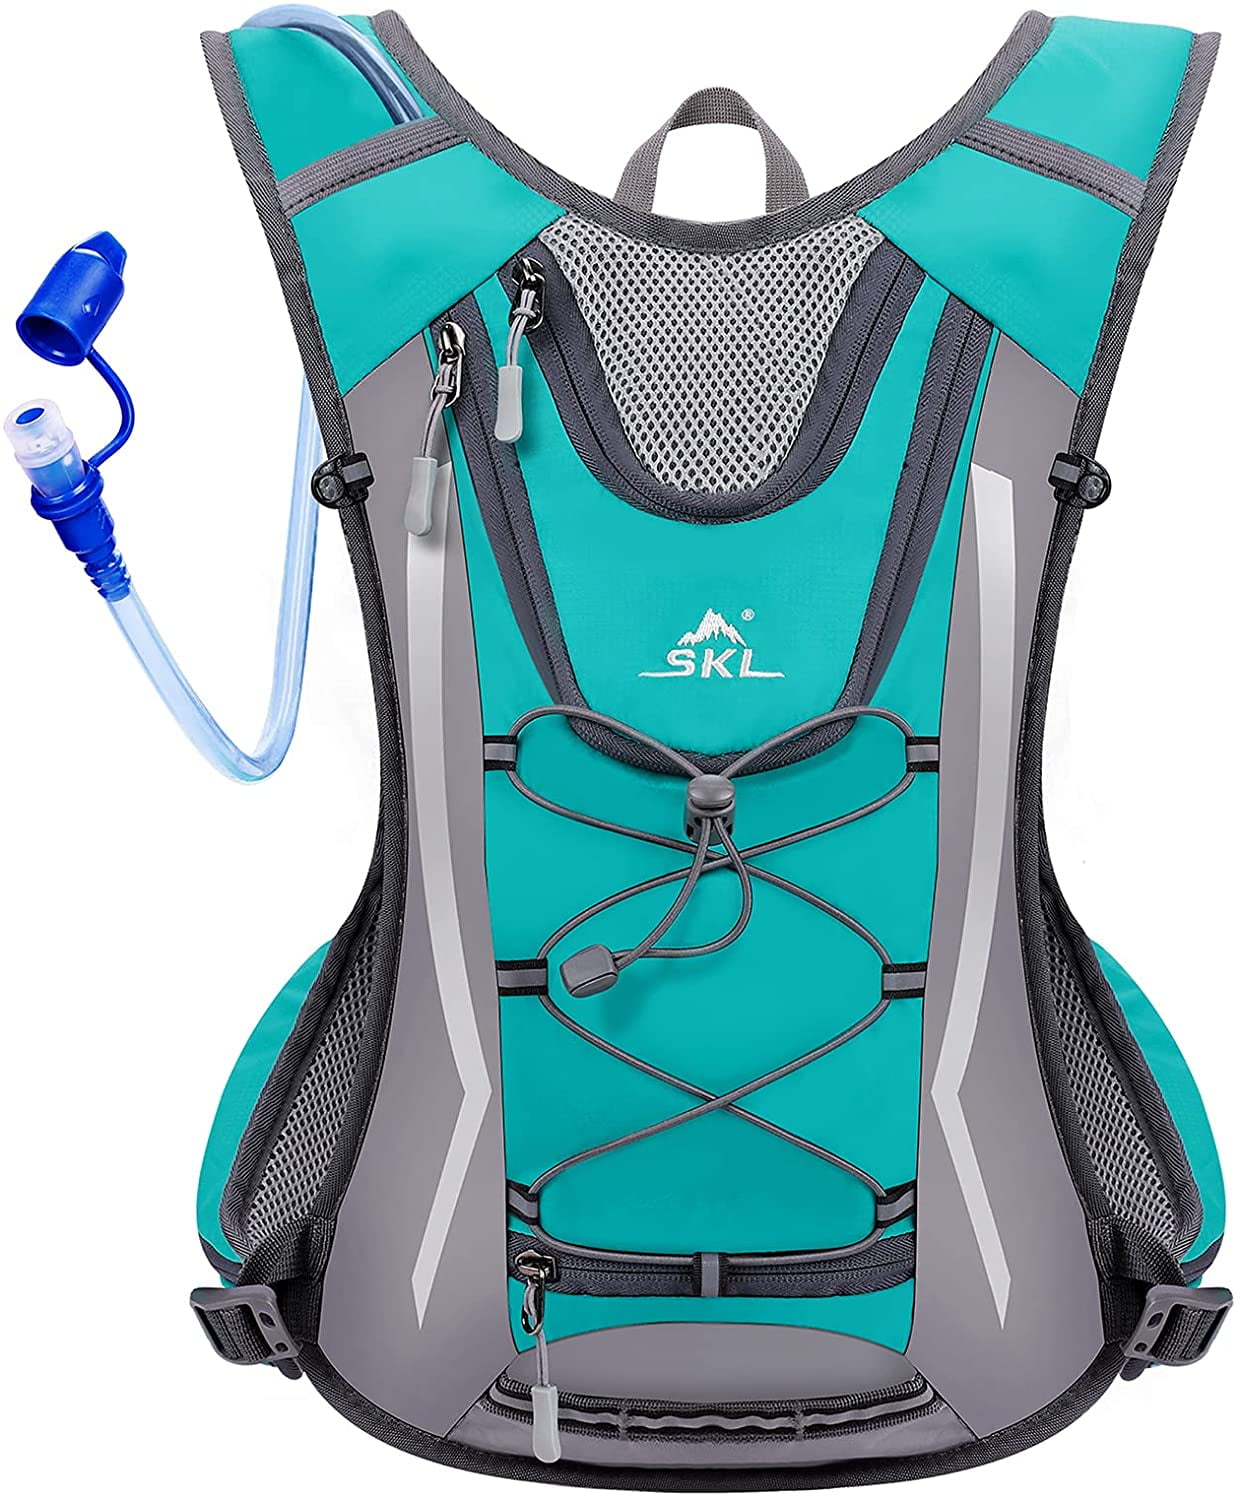 S.K.L Hydration Pack Lightweight Water Backpack for Running Hiking Cycling Biking Climbing Camping Hydration Backpack with 2 Liter Water Bladder